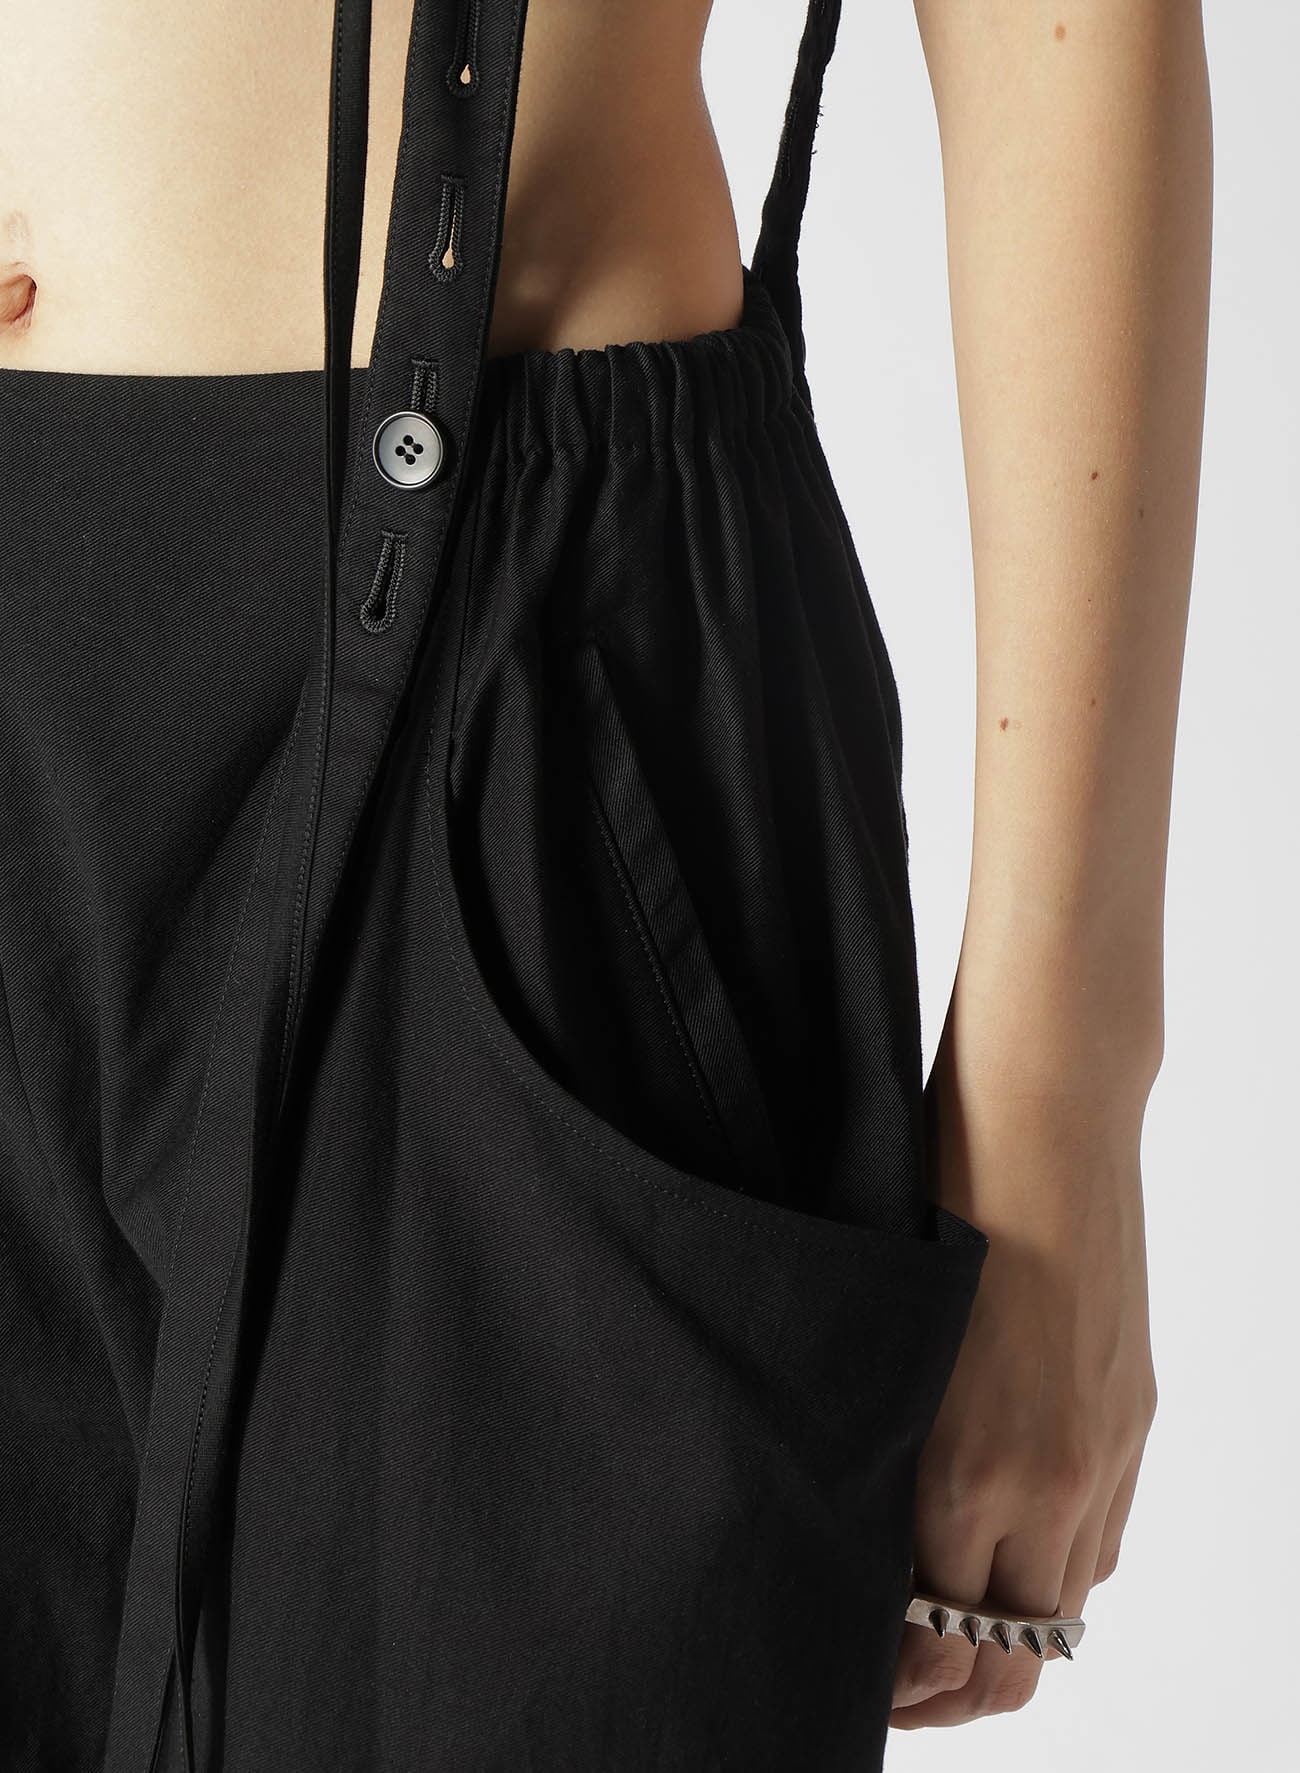 COTTON SERGE PANTS WITH SUSPENDERS